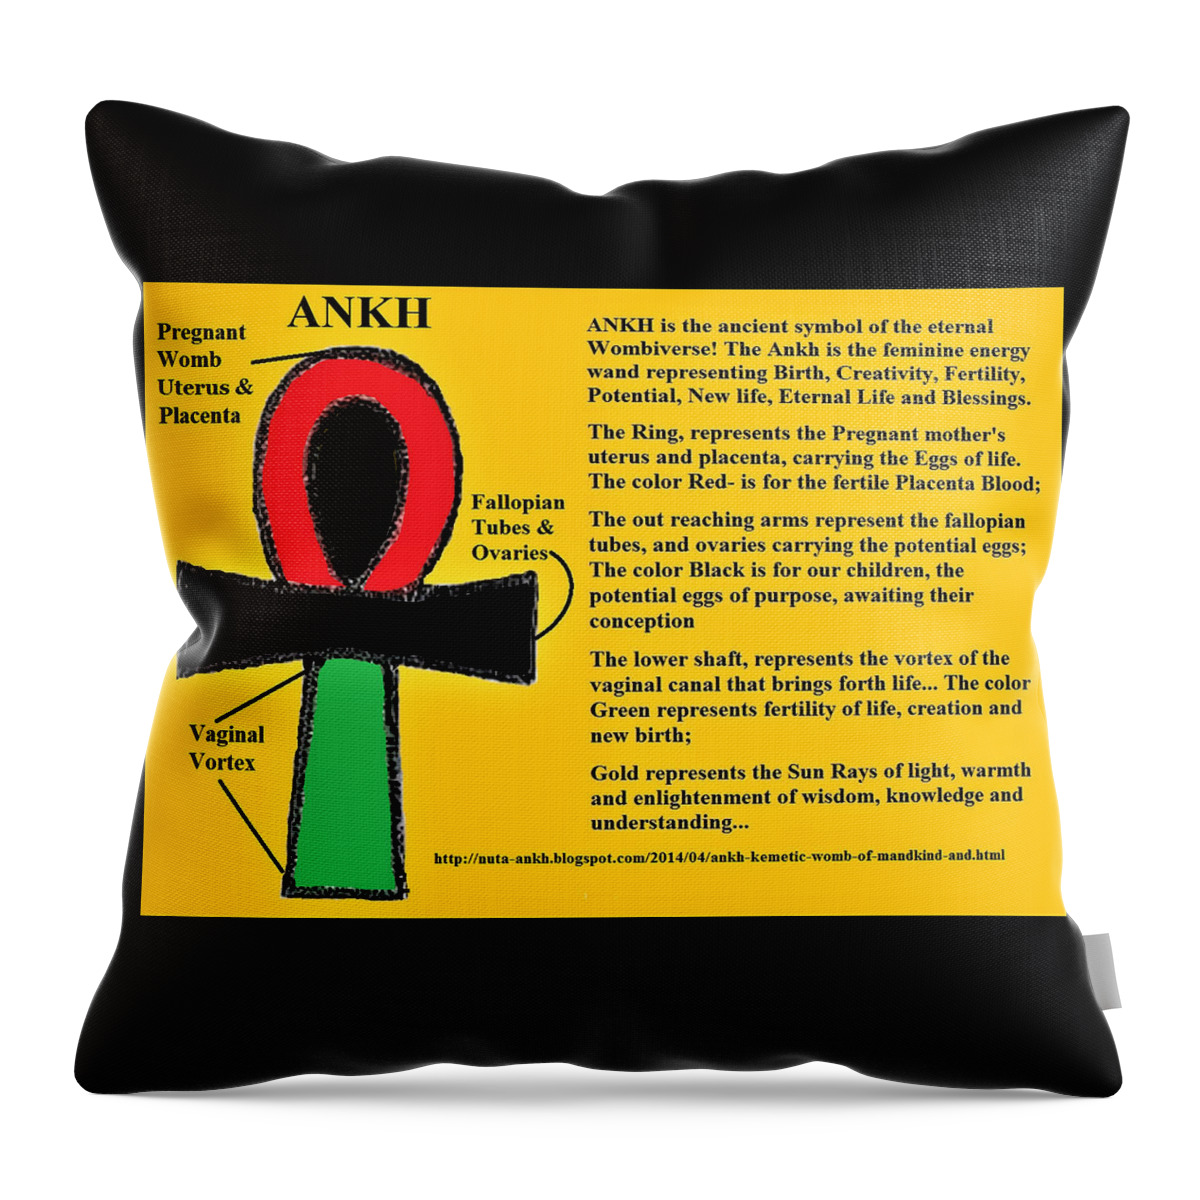 Ankh Throw Pillow featuring the digital art ANKH Meaning by Adenike AmenRa